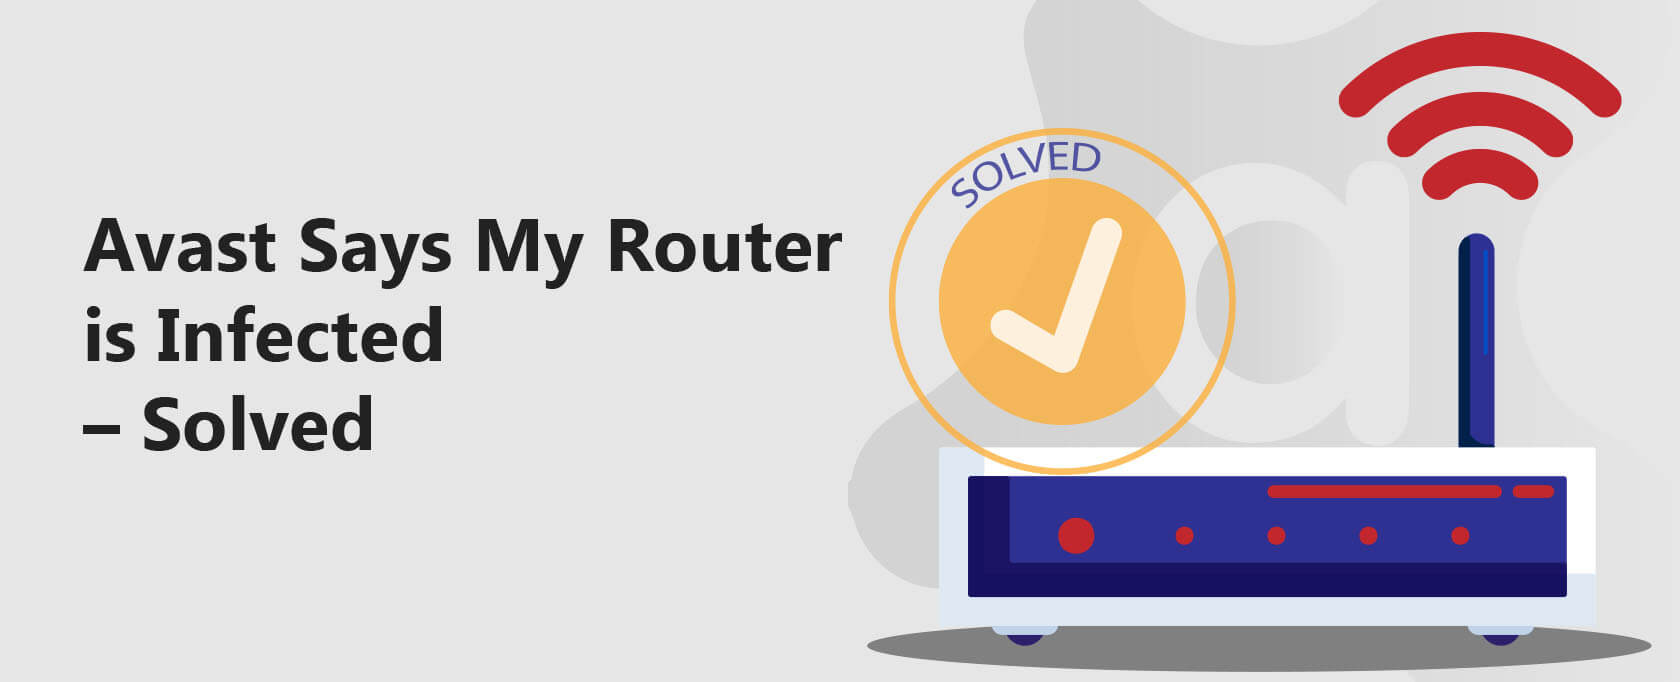 Avast Says My Router is Infected – Solved